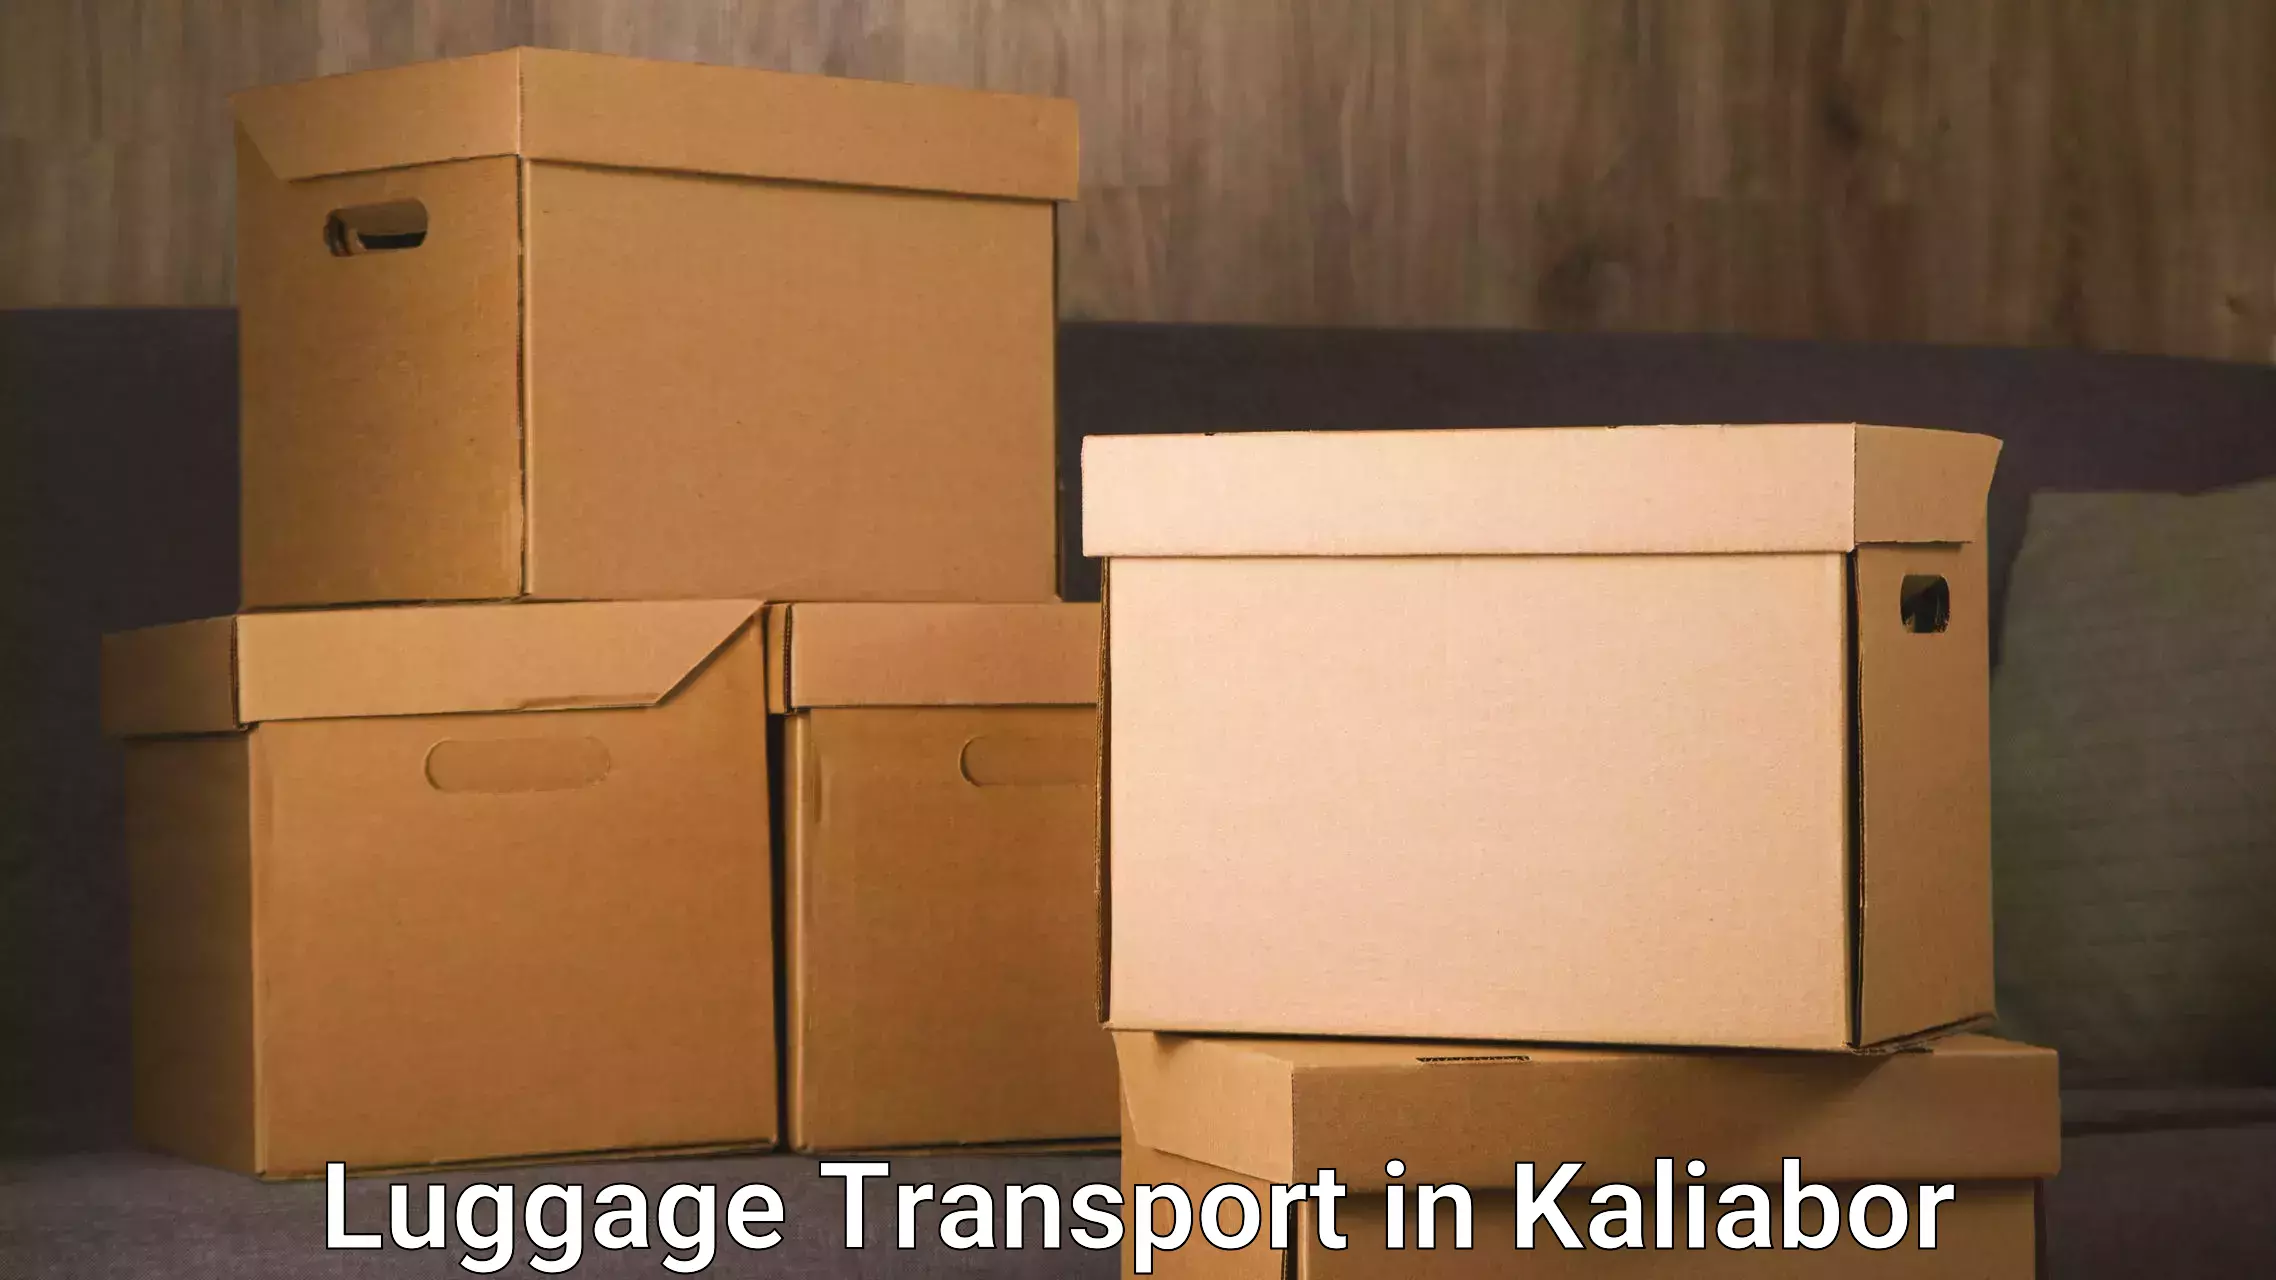 Luggage shipping consultation in Kaliabor